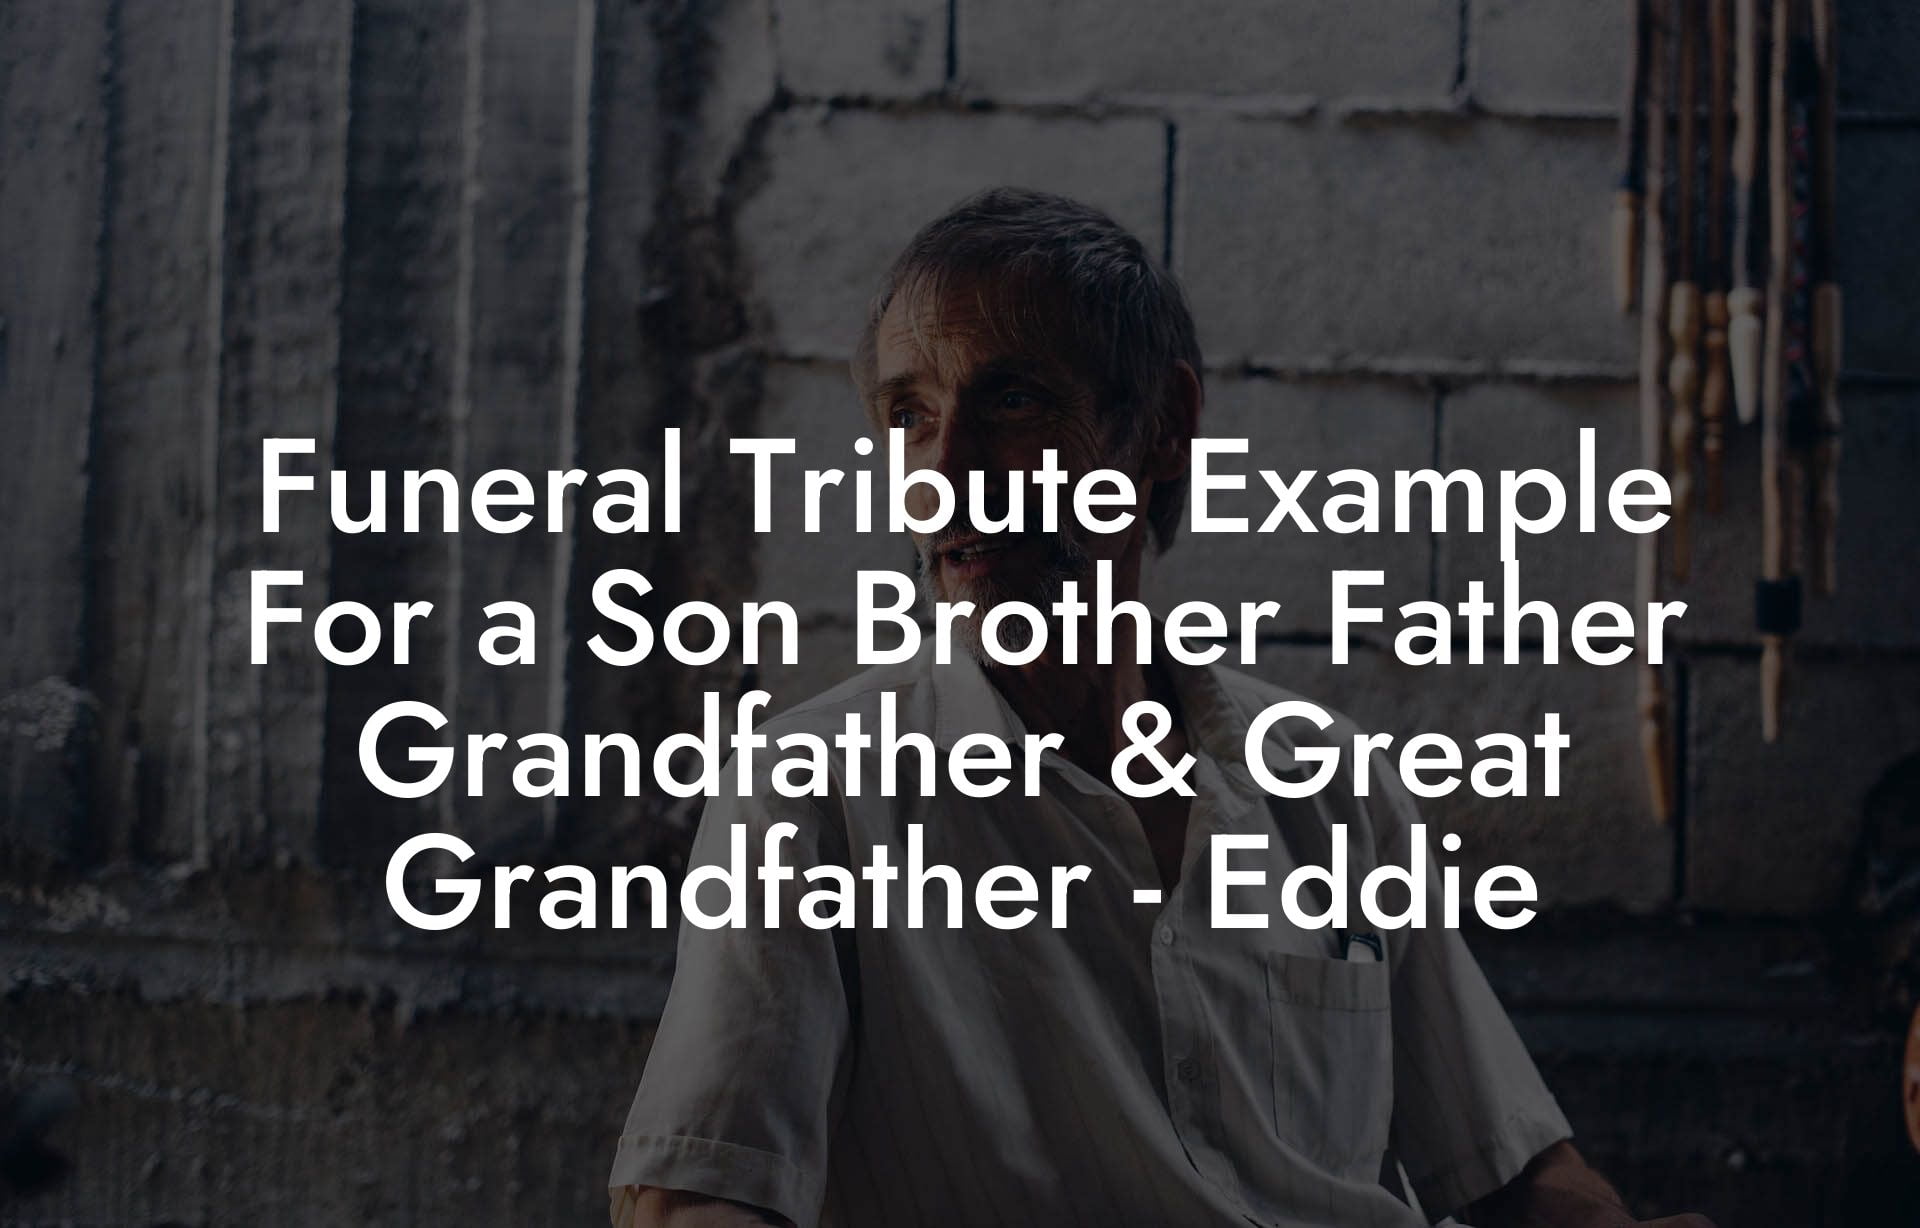 Funeral Tribute Example For a Son Brother Father Grandfather & Great Grandfather   Eddie